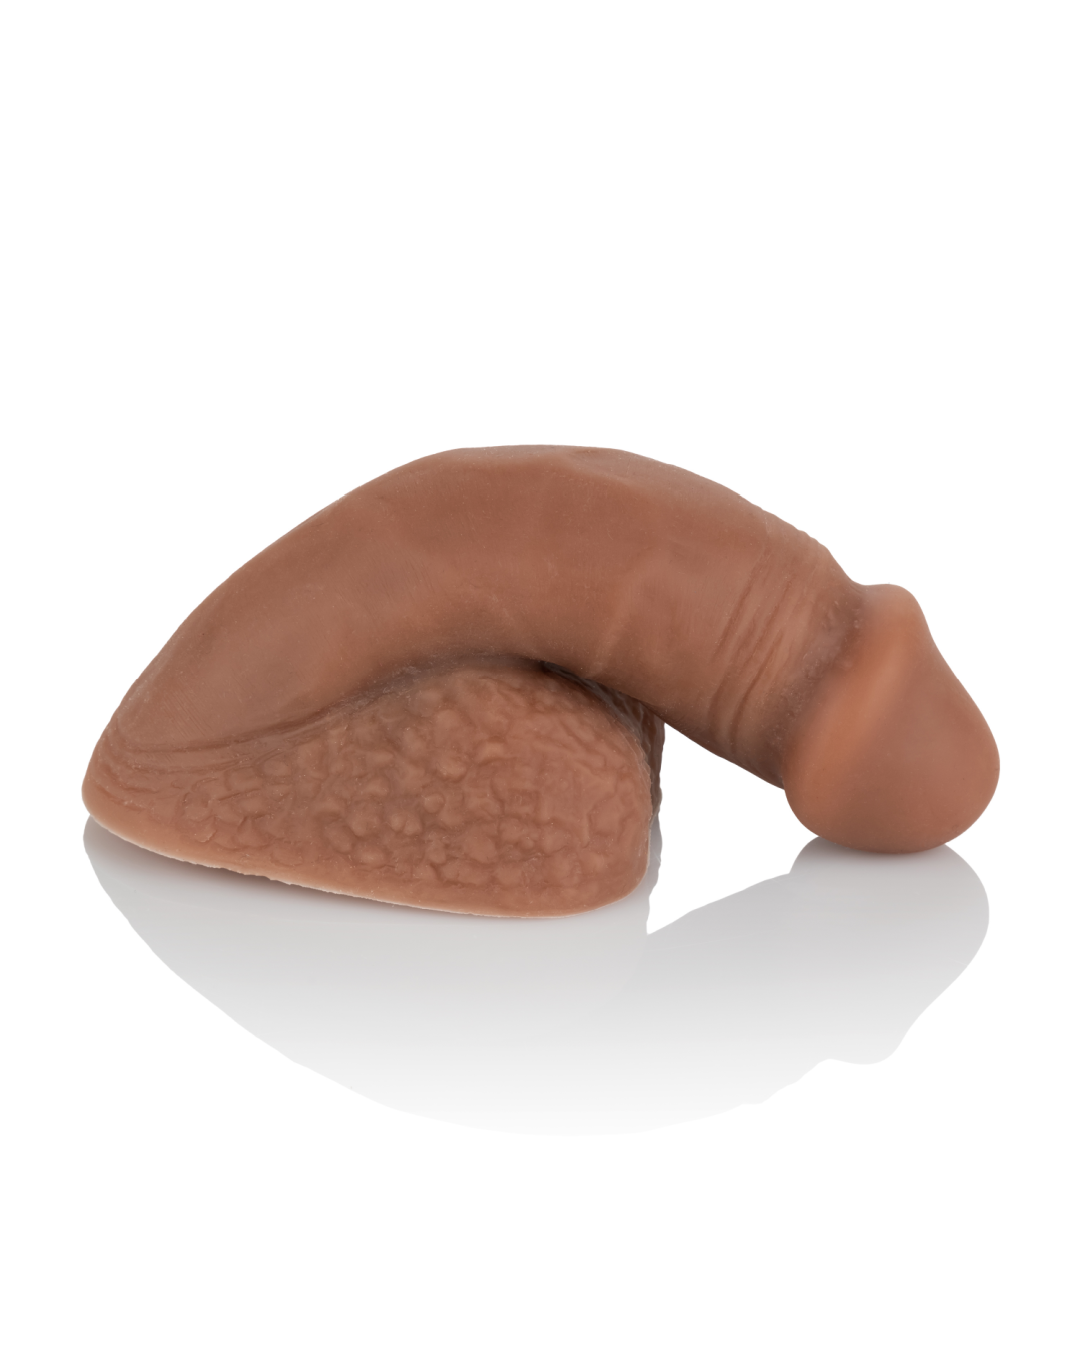 Packer Gear Silicone Packing Penis 5 Inch - Mocha